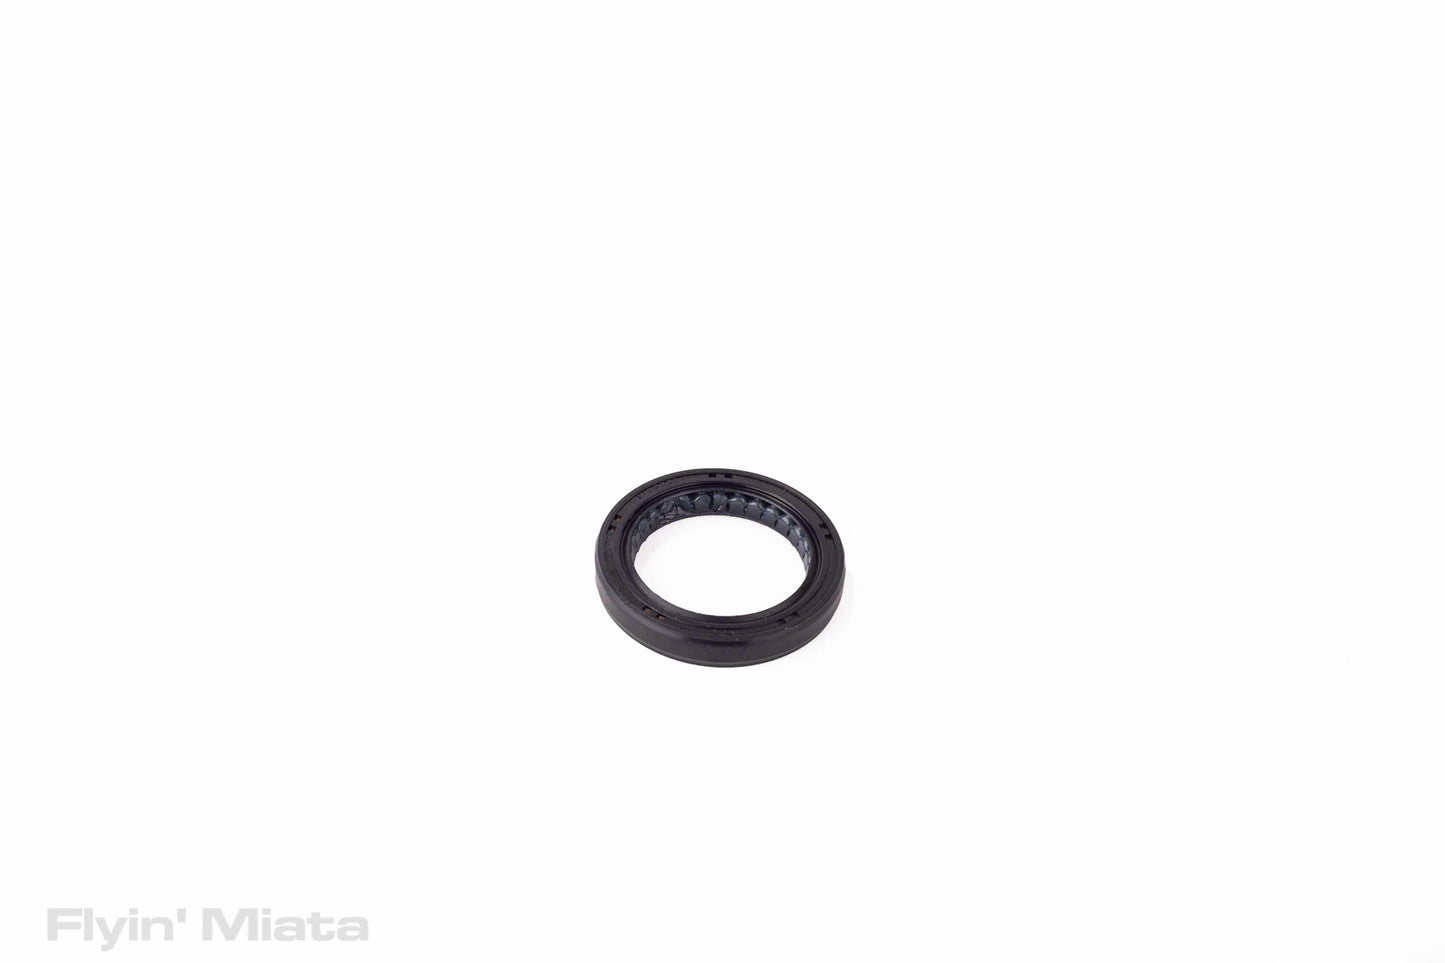 1999-2005 6-speed front transmission oil seal